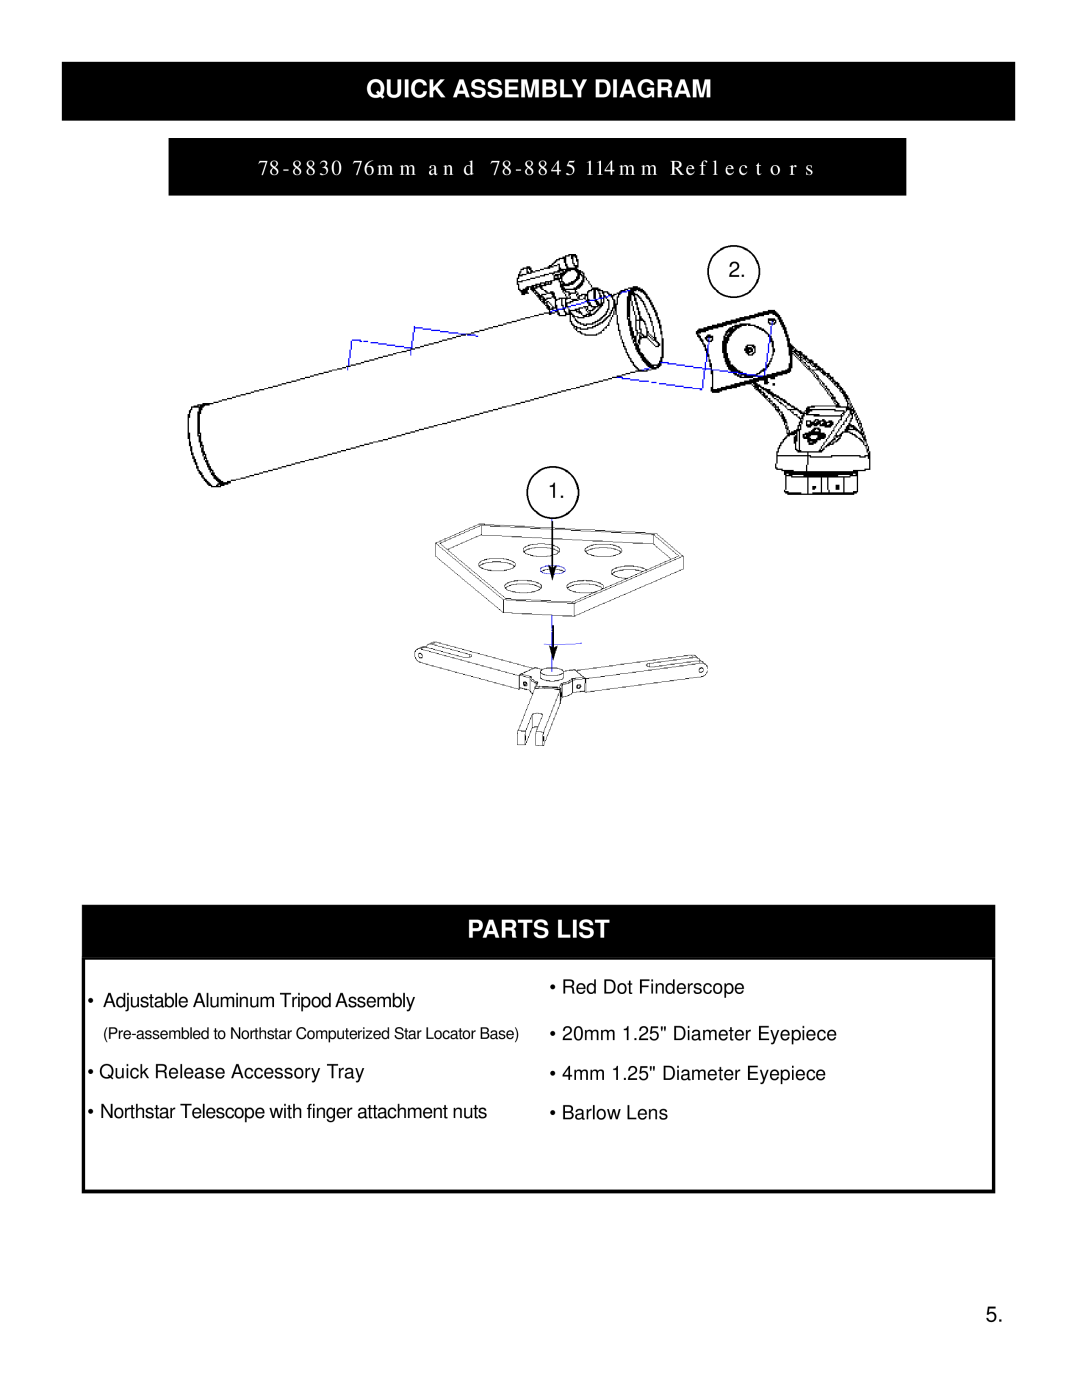 Bushnell North Star GOTO Quick Assembly Diagram, Parts List, 78-883076mm and 78-8845114mm Reflectors, • Barlow Lens 